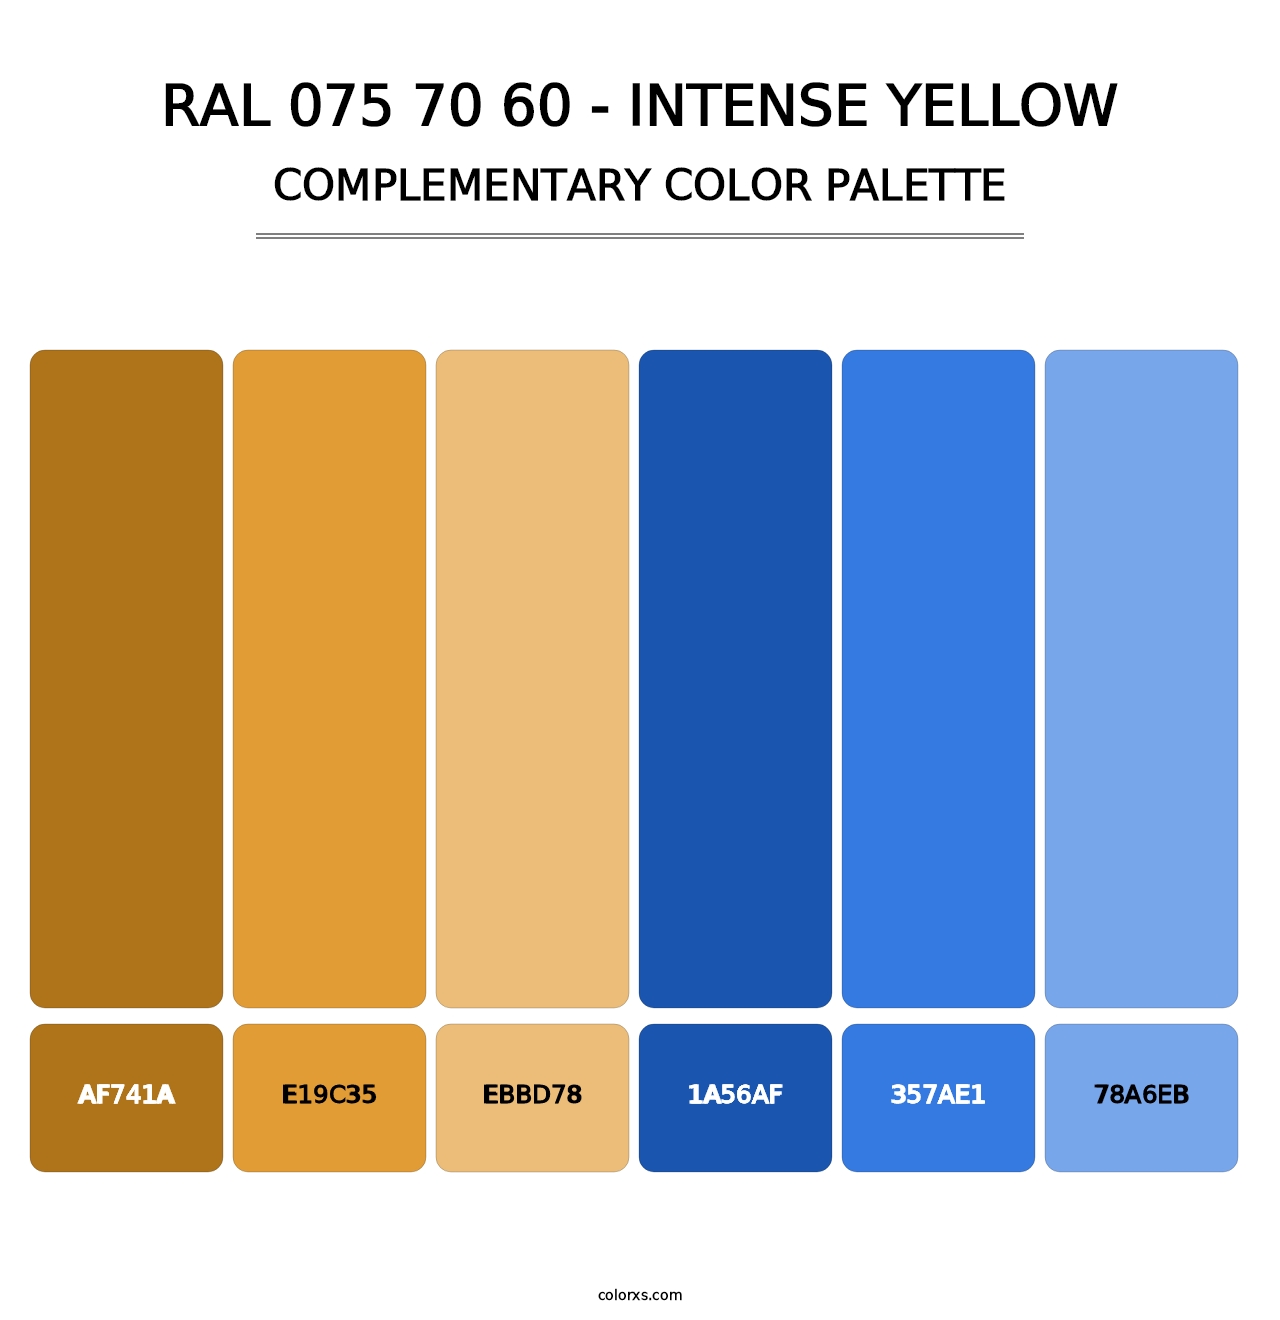 RAL 075 70 60 - Intense Yellow - Complementary Color Palette